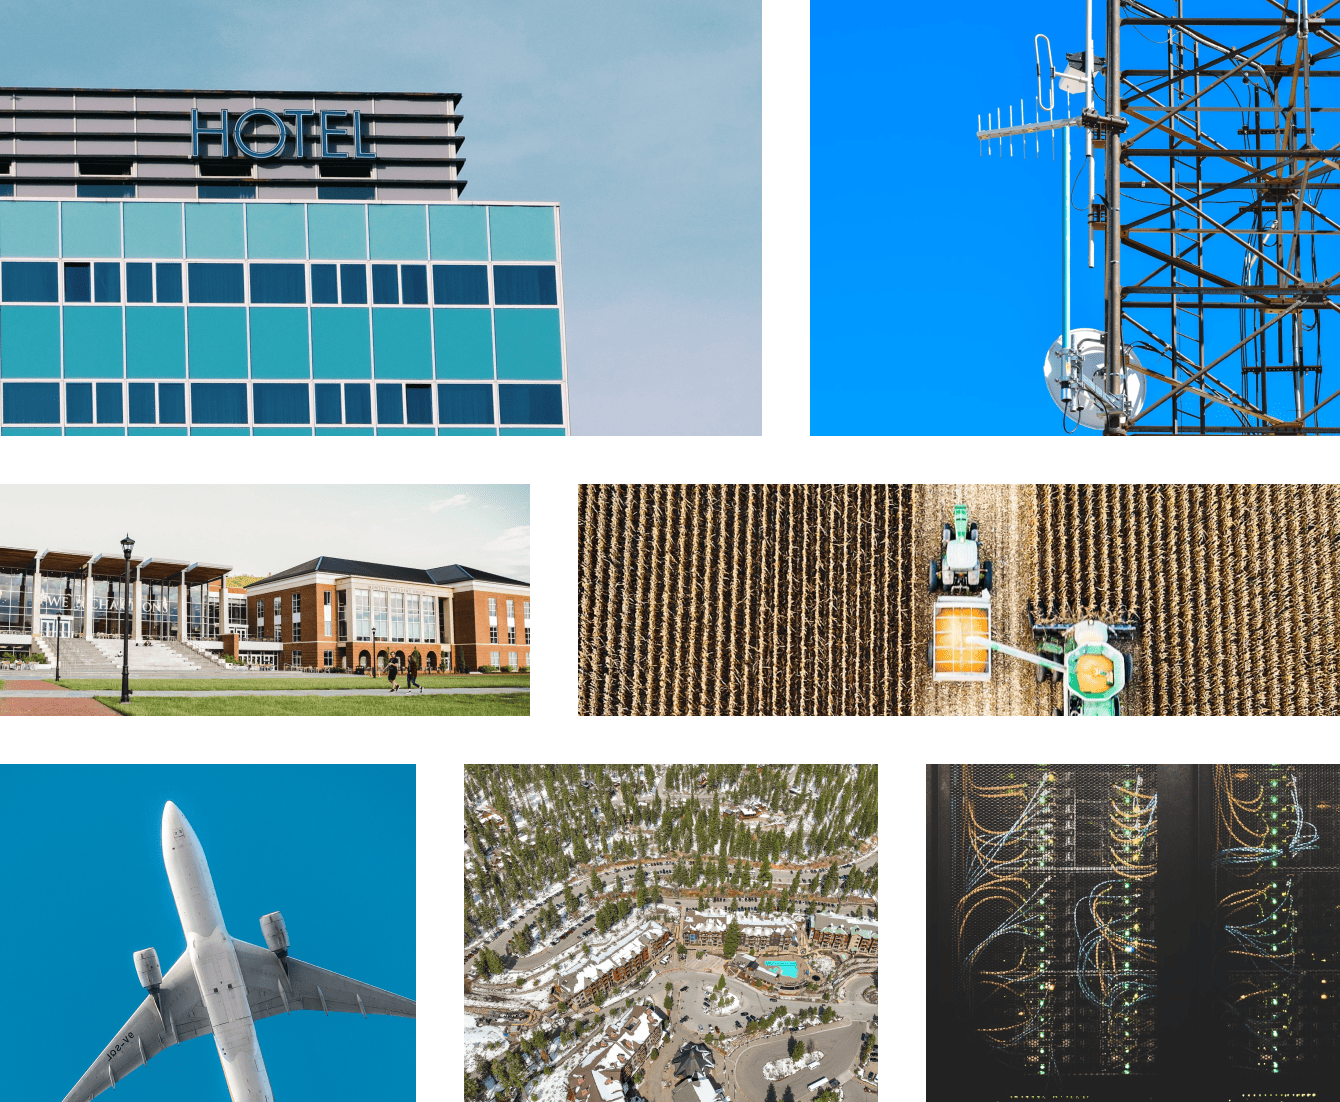 Image grid of a hotel, electricity, college campus, agriculture farm, airplane, city and data center